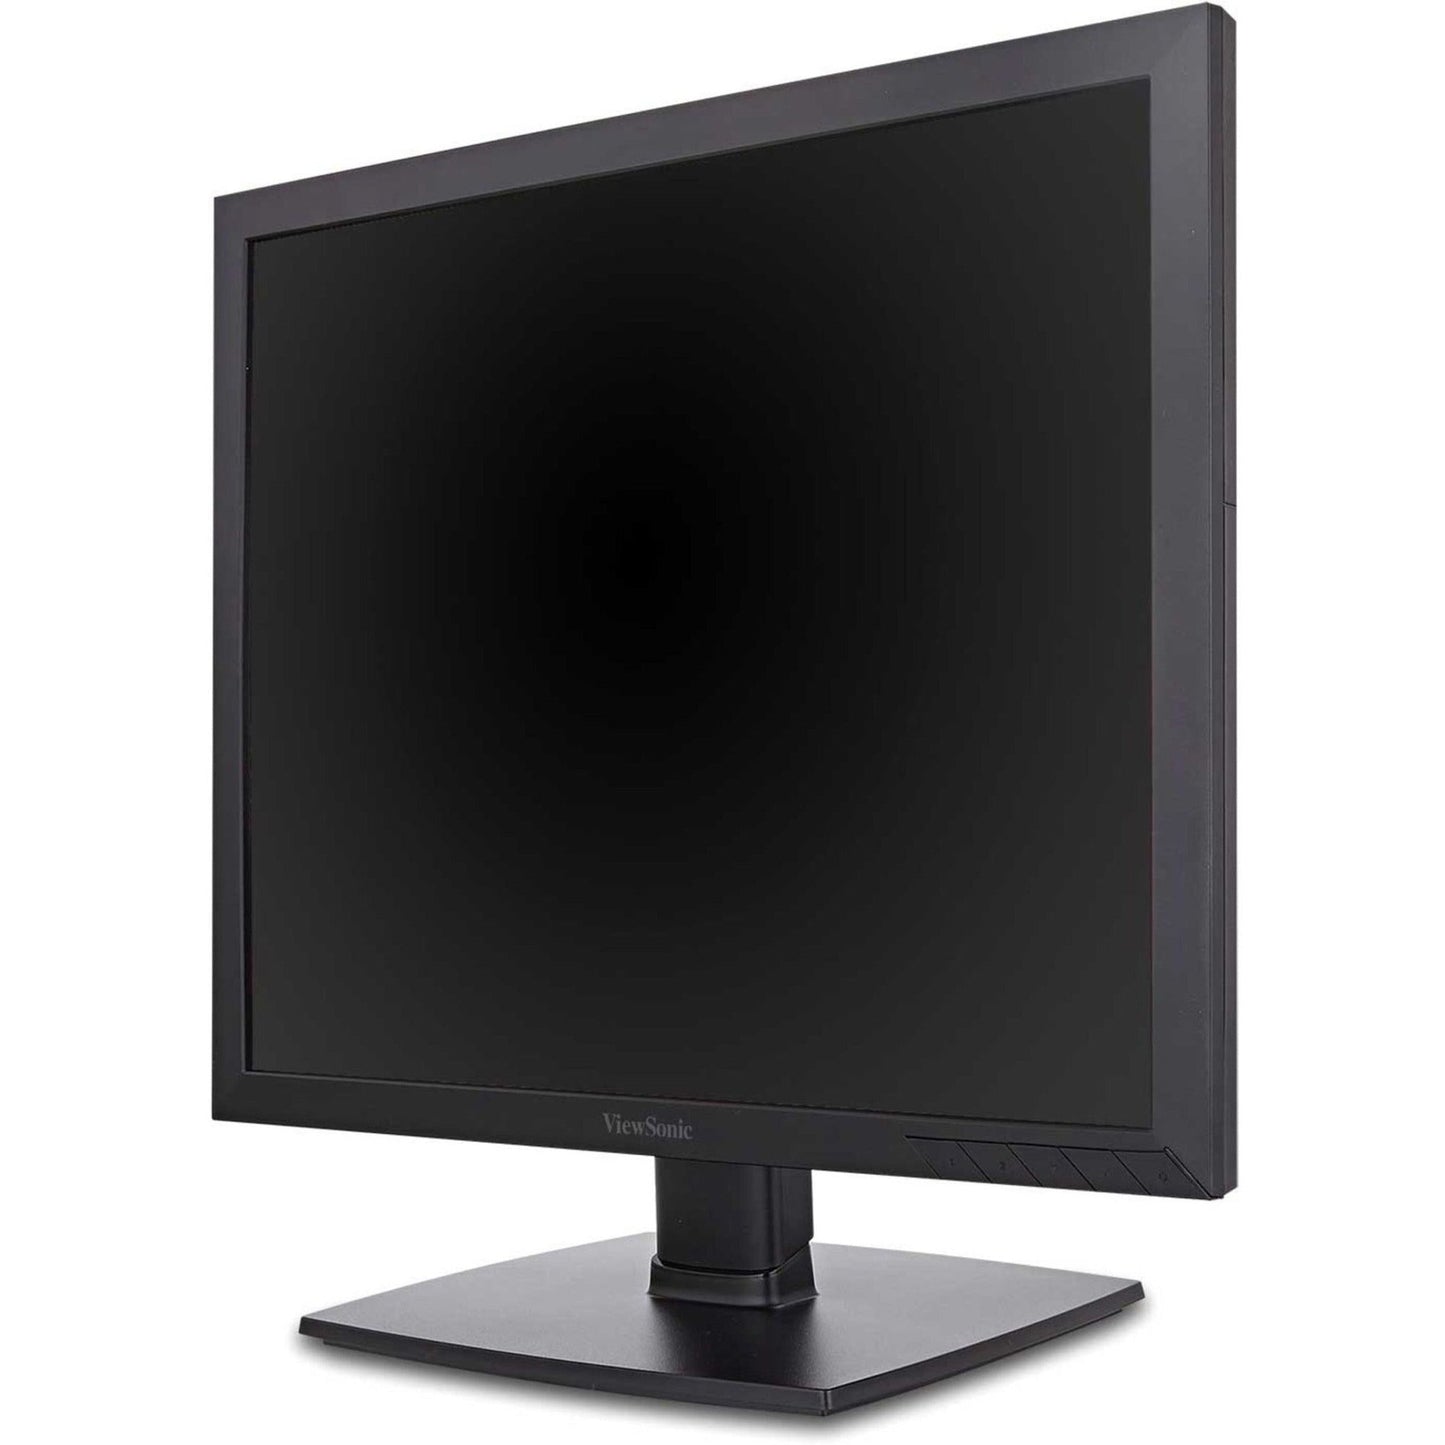 ViewSonic VA951S 19 Inch IPS 1024p LED Monitor with DVI VGA and Enhanced Viewing Comfort